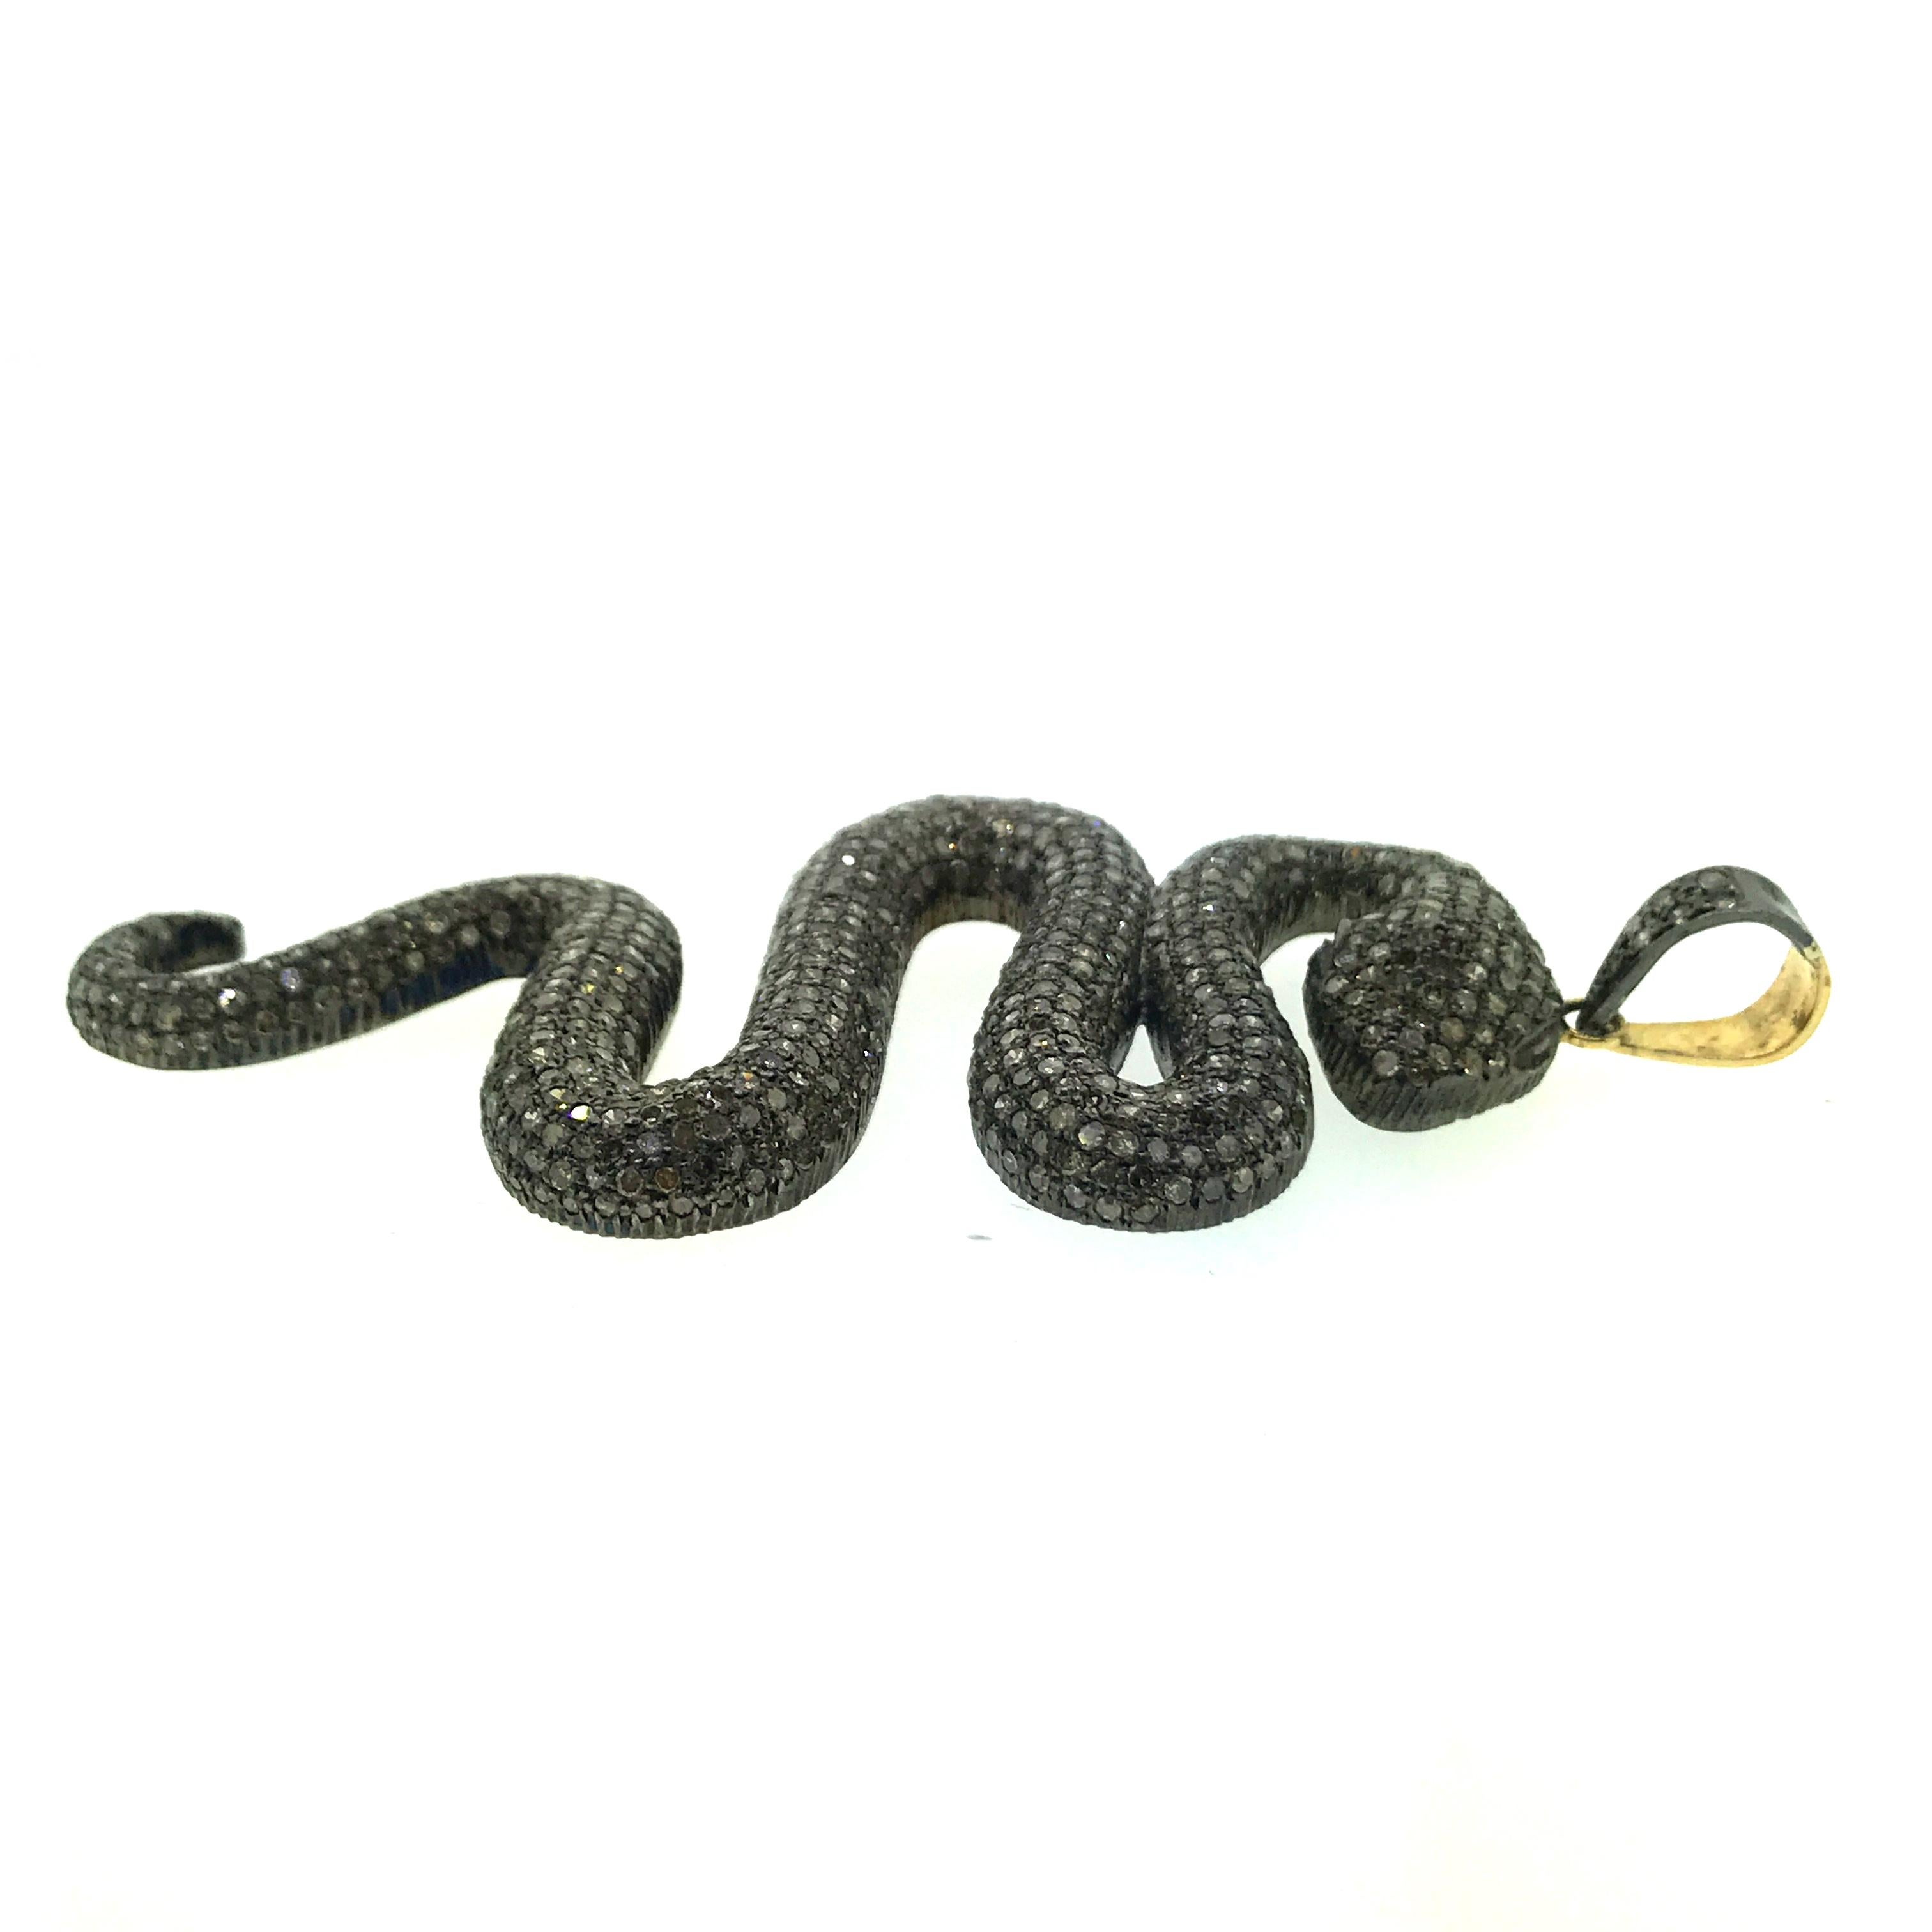 9.93 Carat Pave Diamond Snake Pendant in Oxidized Sterling Silver, 14 Karat Gold In New Condition For Sale In New York, NY